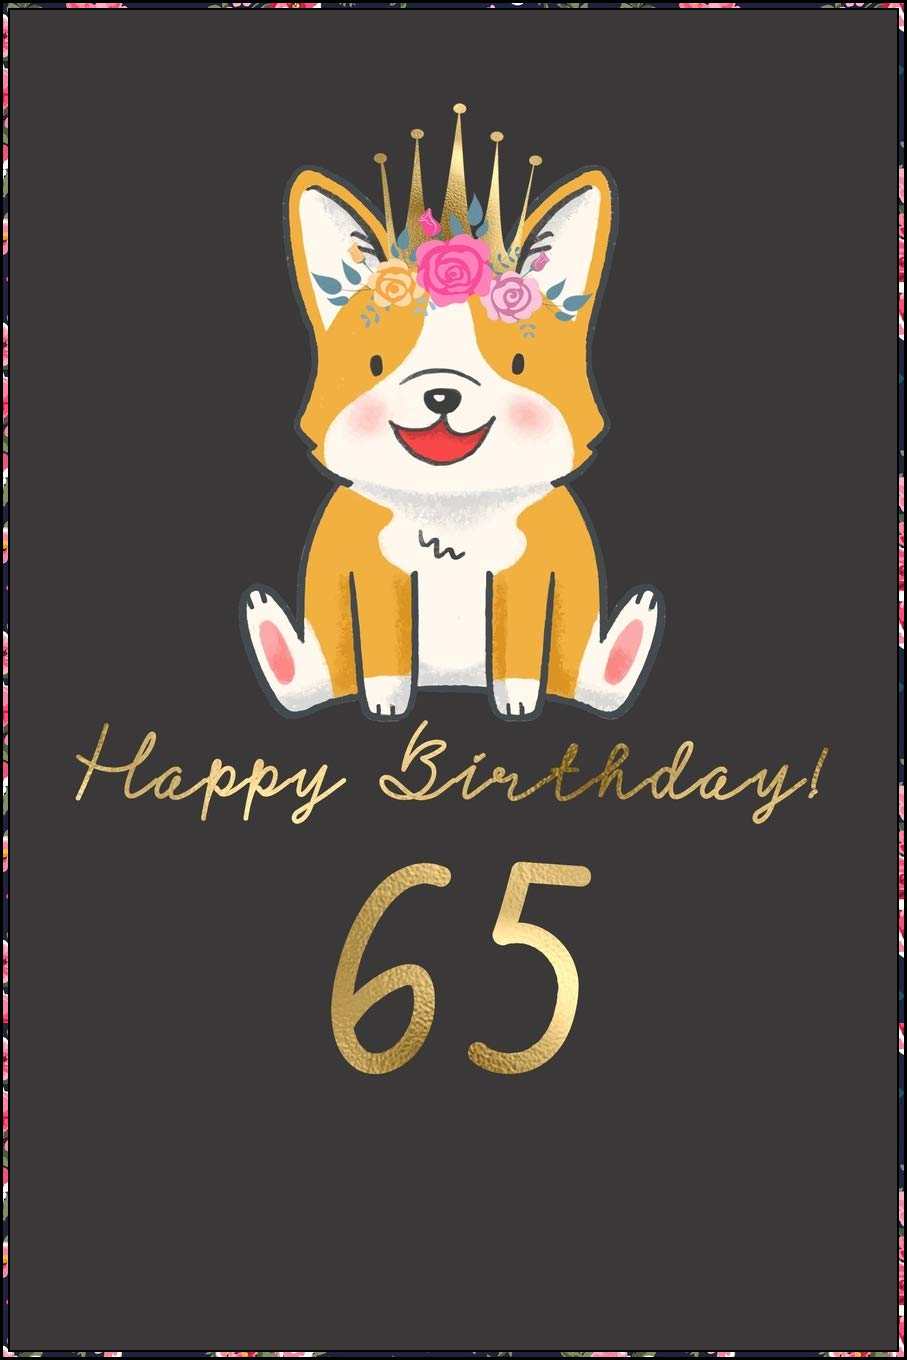 funny happy 65th birthday images
